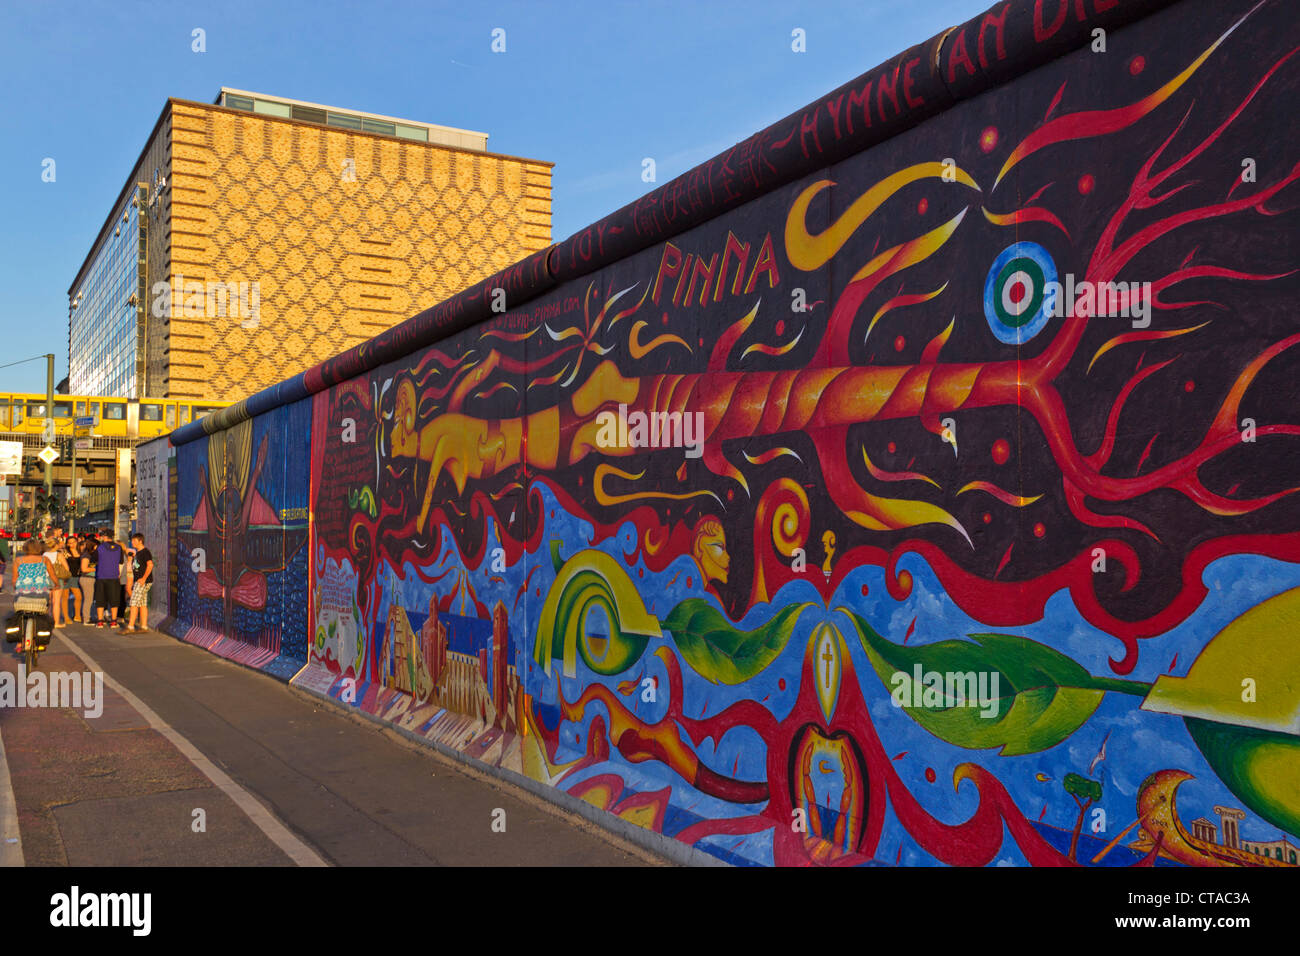 Alamy photography stock - wall images mural hi-res Berlin and